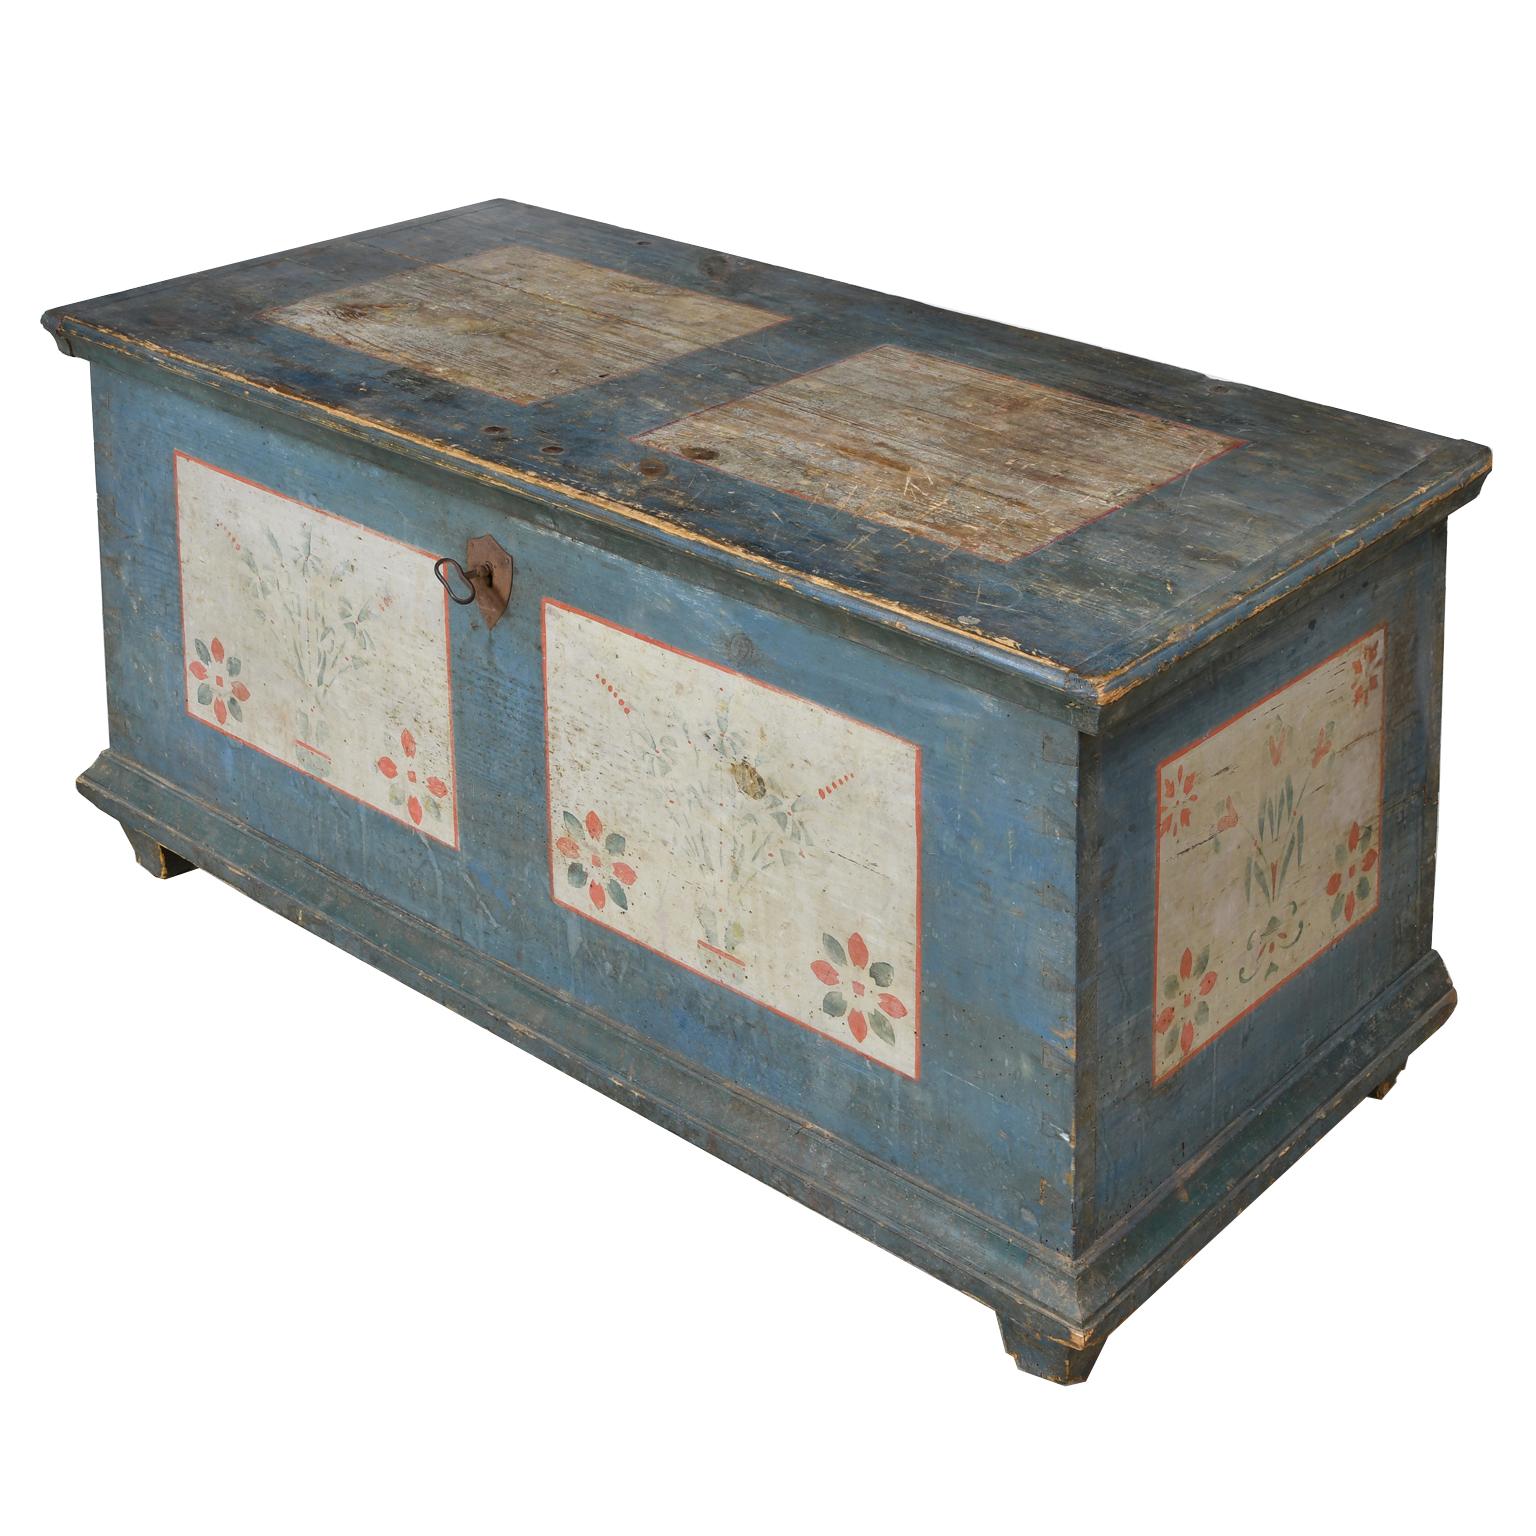 Folk Art Dowry Chest with Original Blue Paint & Floral Design, Northern Europe circa 1780